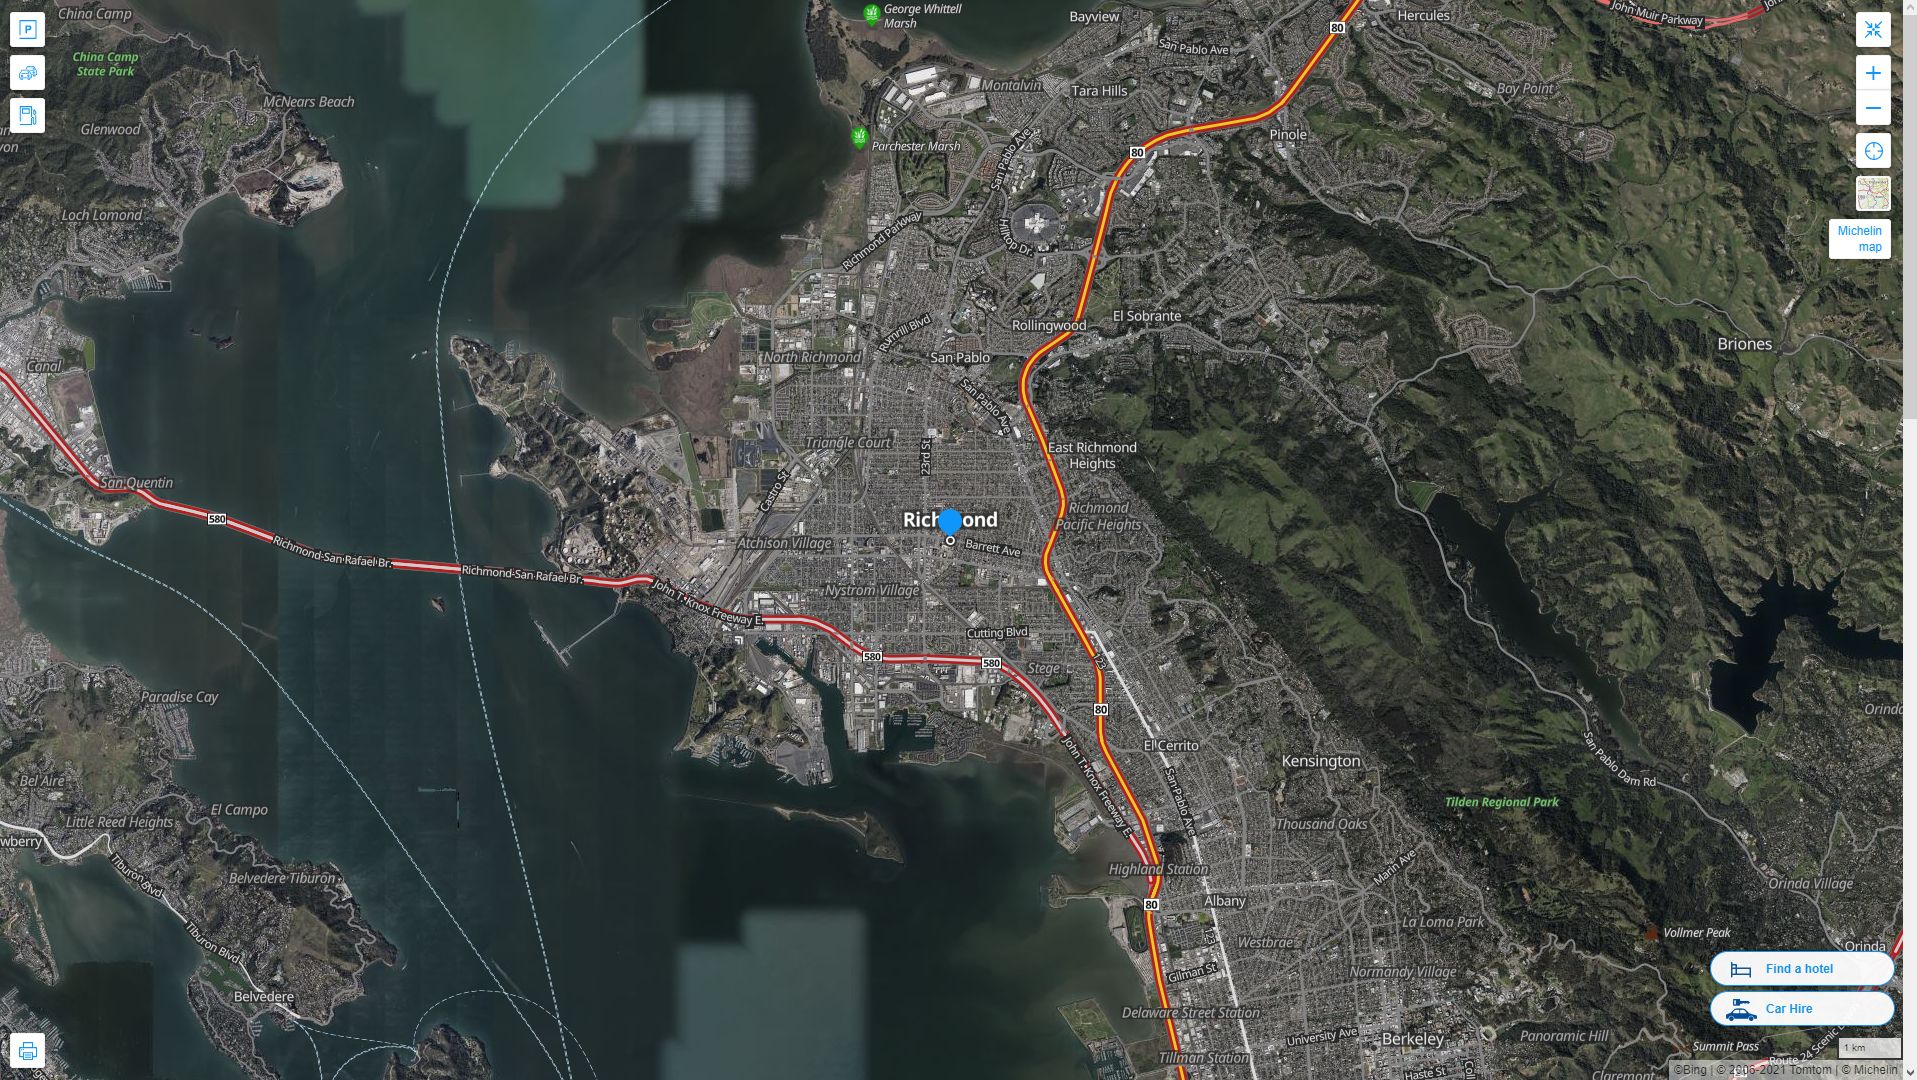 Richmond California Highway and Road Map with Satellite View